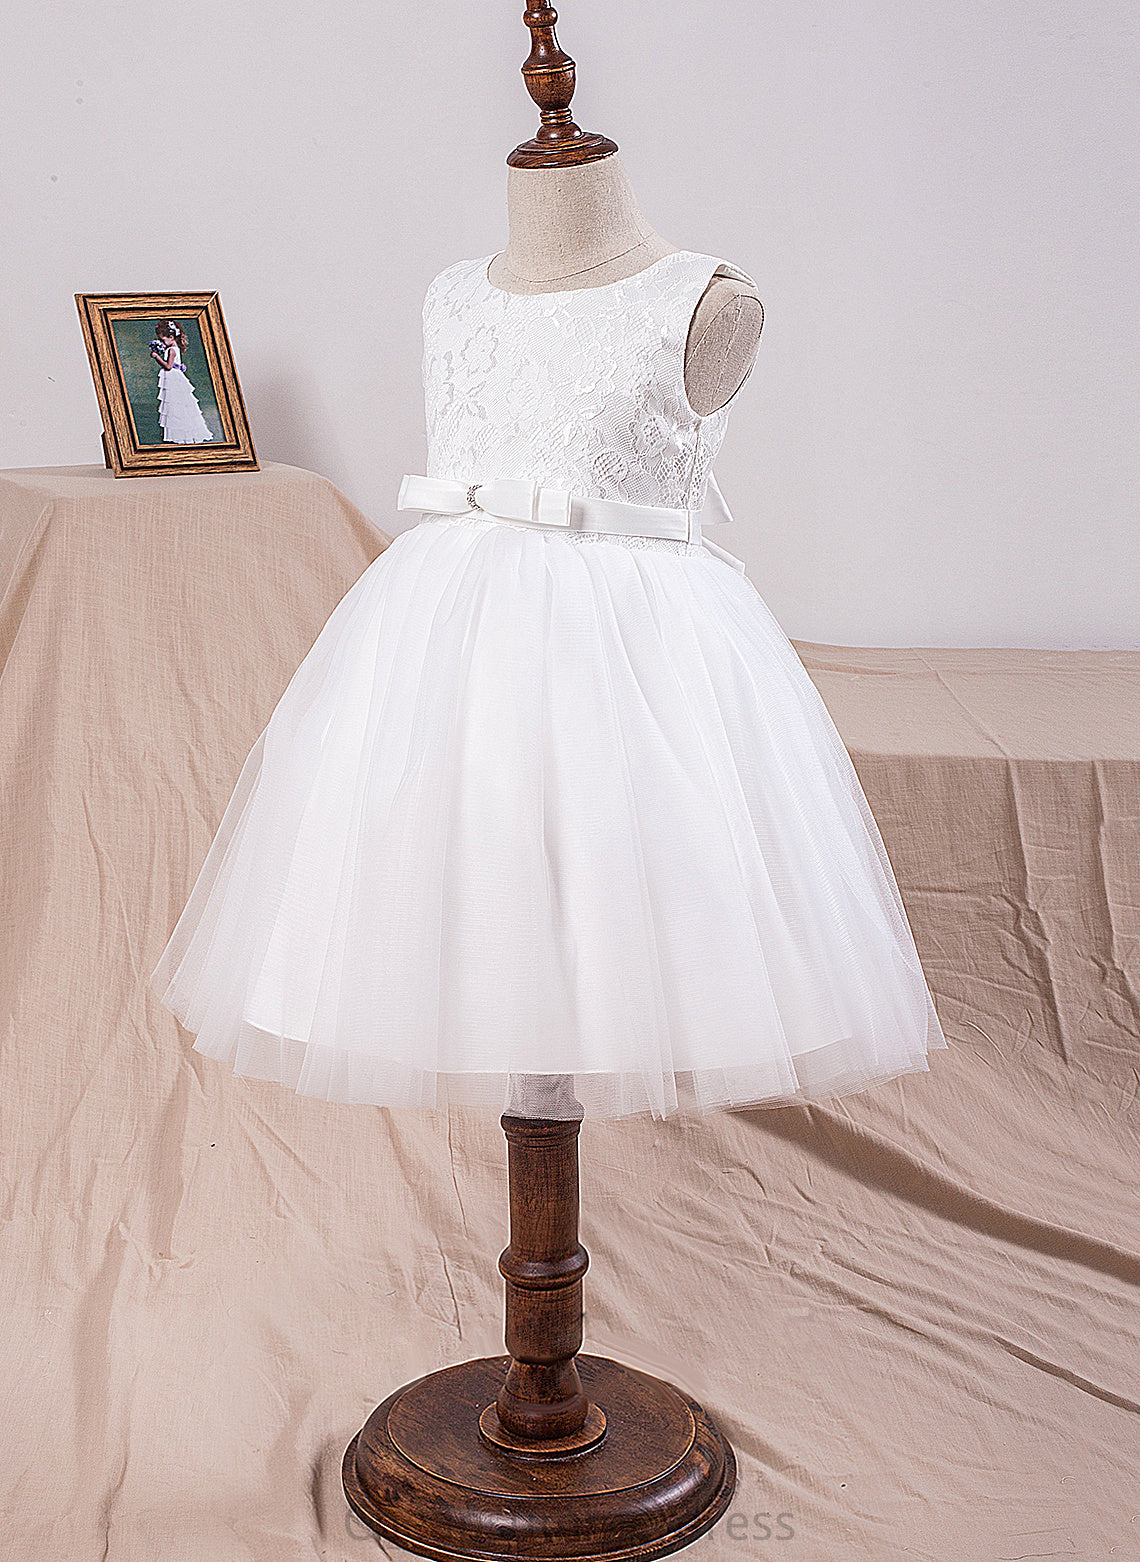 - Girl Scoop Flower Ball-Gown/Princess Flower Girl Dresses Dress Neck Carolyn Sleeveless Tulle/Lace With Bow(s) Knee-length